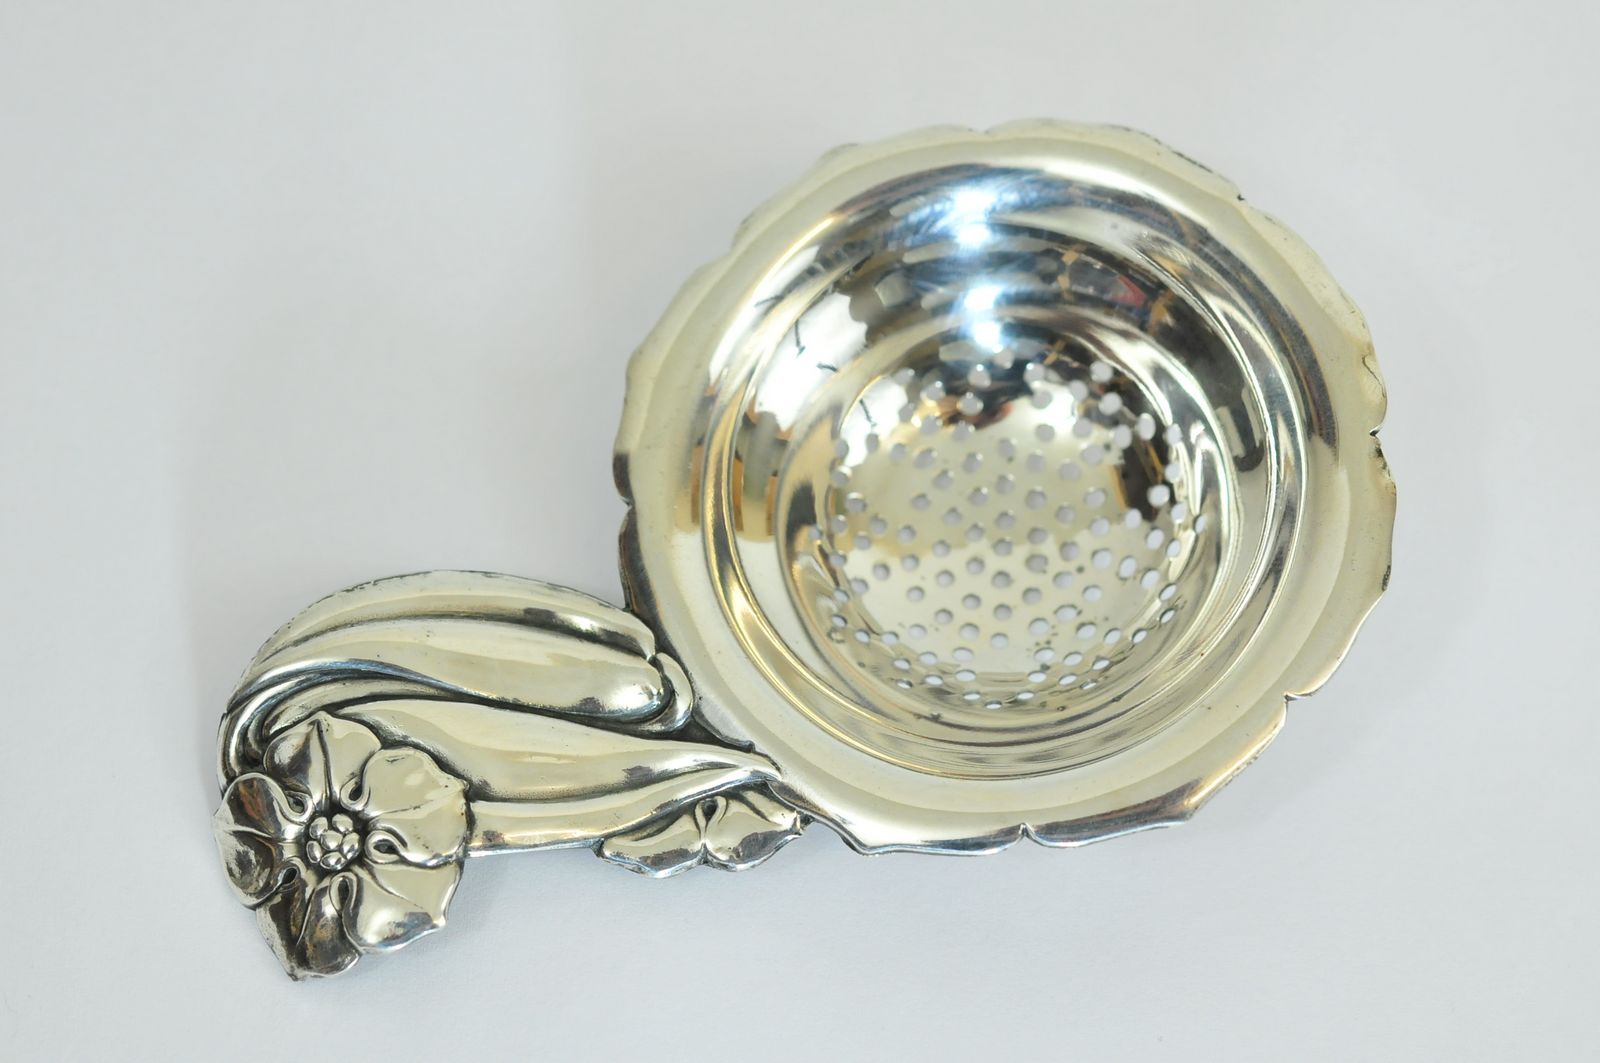 A George Nillsson continental silver tea caddy spoon of foliate design weighing approximately 48